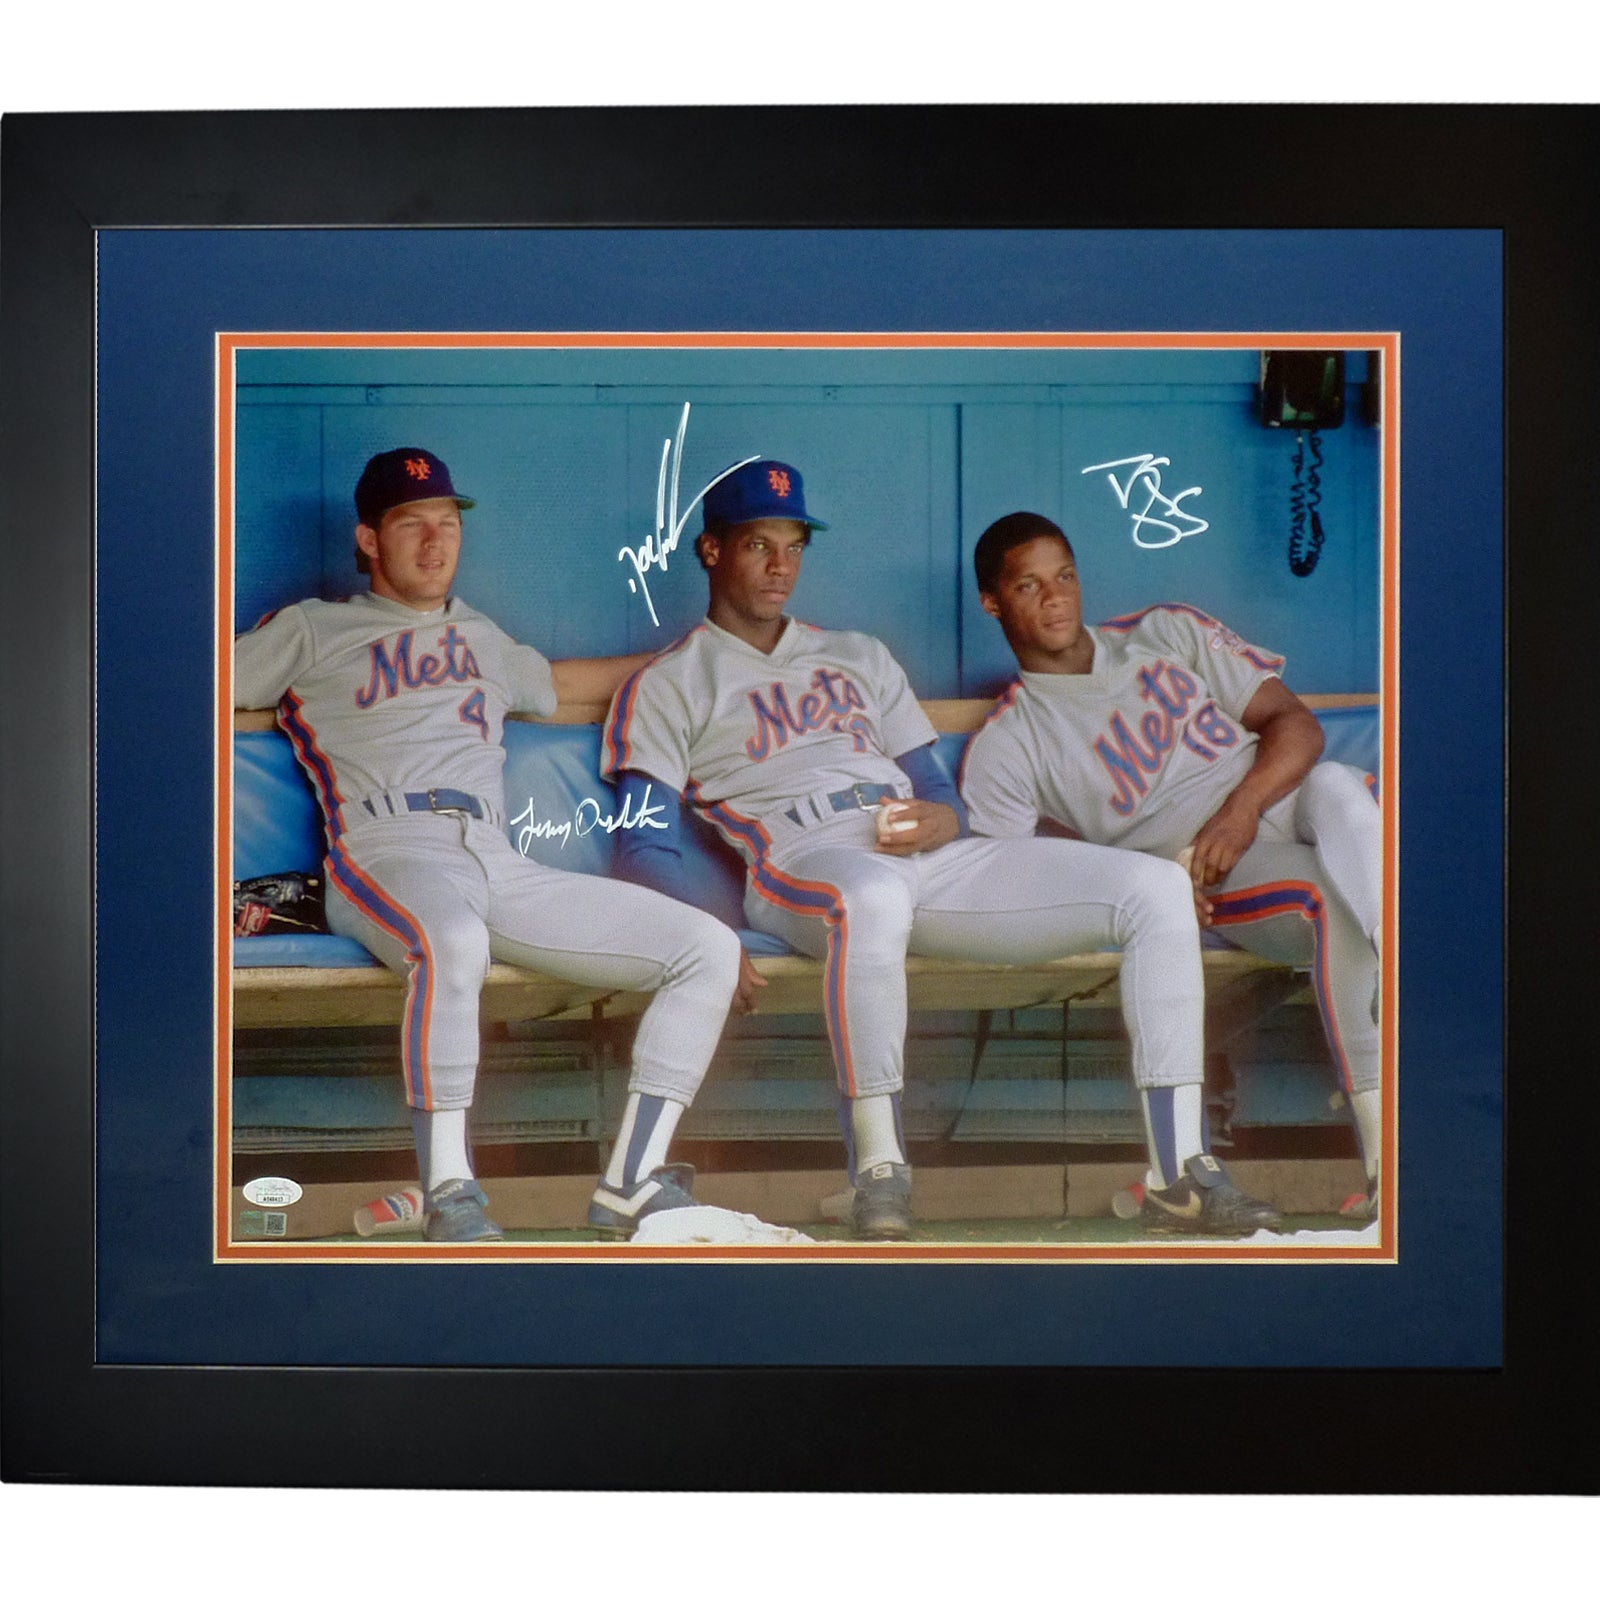 Lenny Dykstra, Dwight Gooden And Darryl Strawberry Autographed New York Mets Deluxe Framed 16x20 Photo - JSA